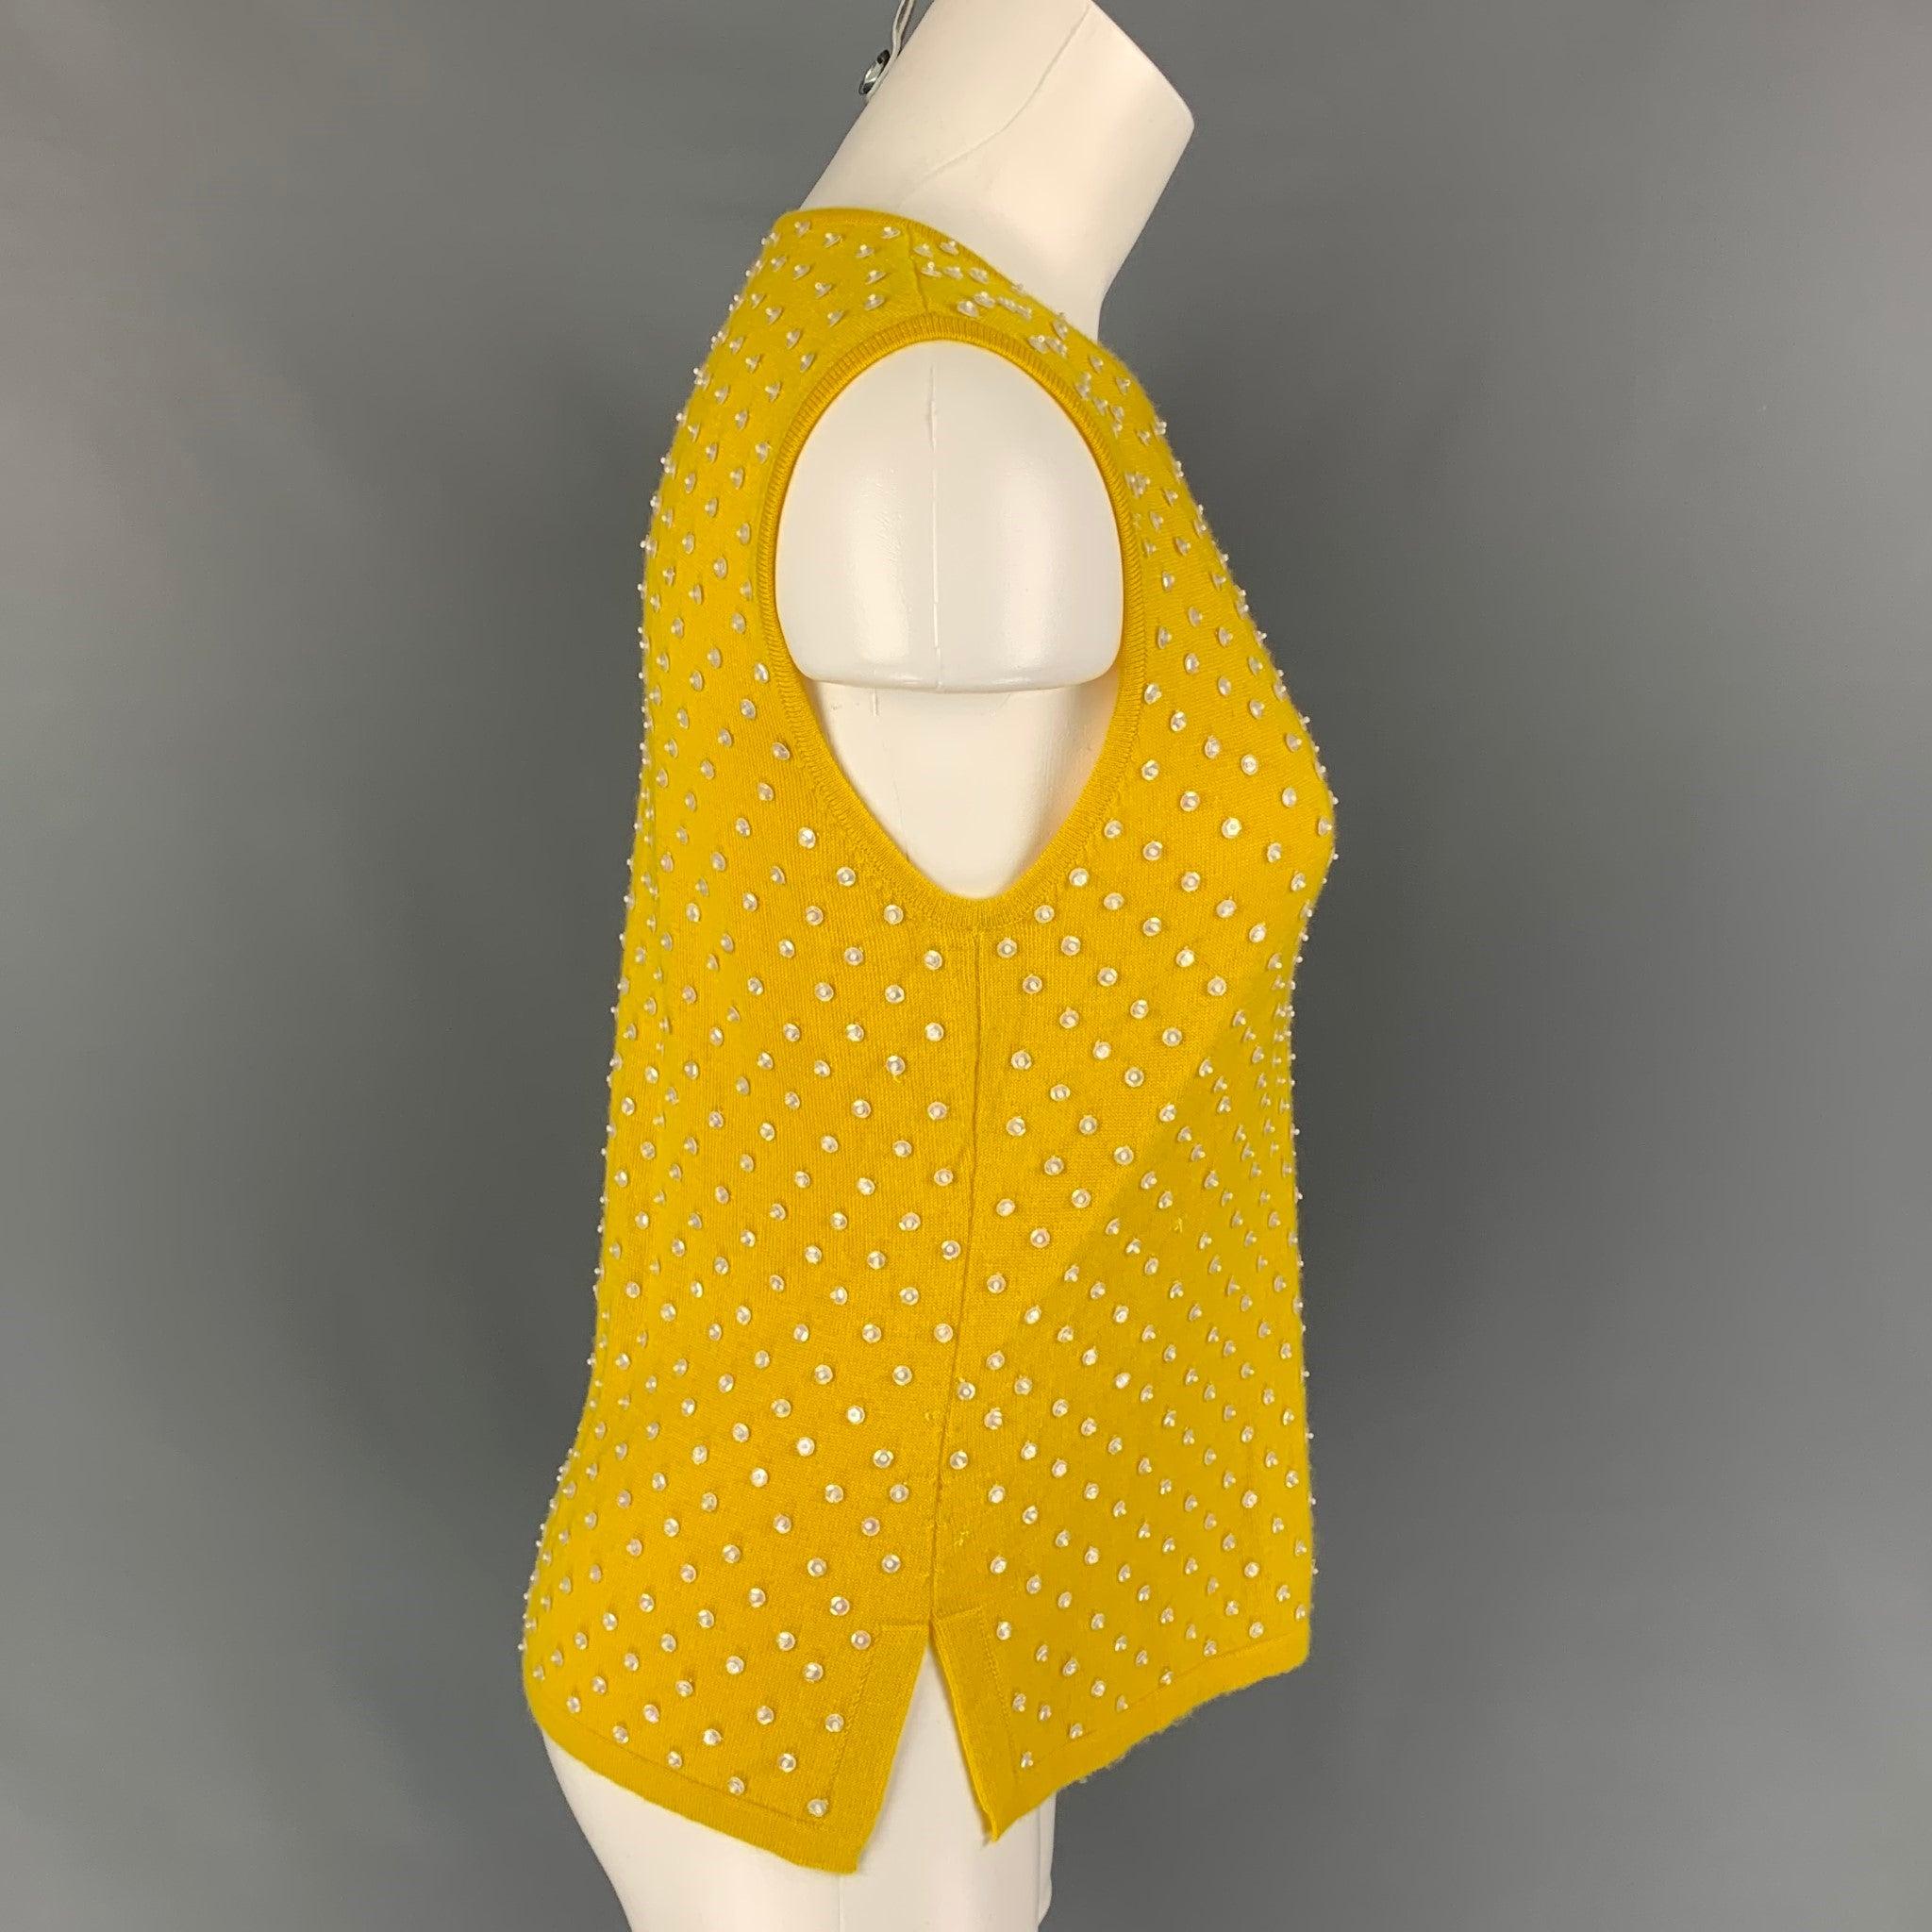 OSCAR DE LA RENTA pullover comes in a yellow knitted cashmere featuring a sleeveless style, beaded embellishments, and a crew-neck. Matching cardigan sold separately.
Very Good
Pre-Owned Condition. Logo & Fabric tag removed.  

Marked:   M 